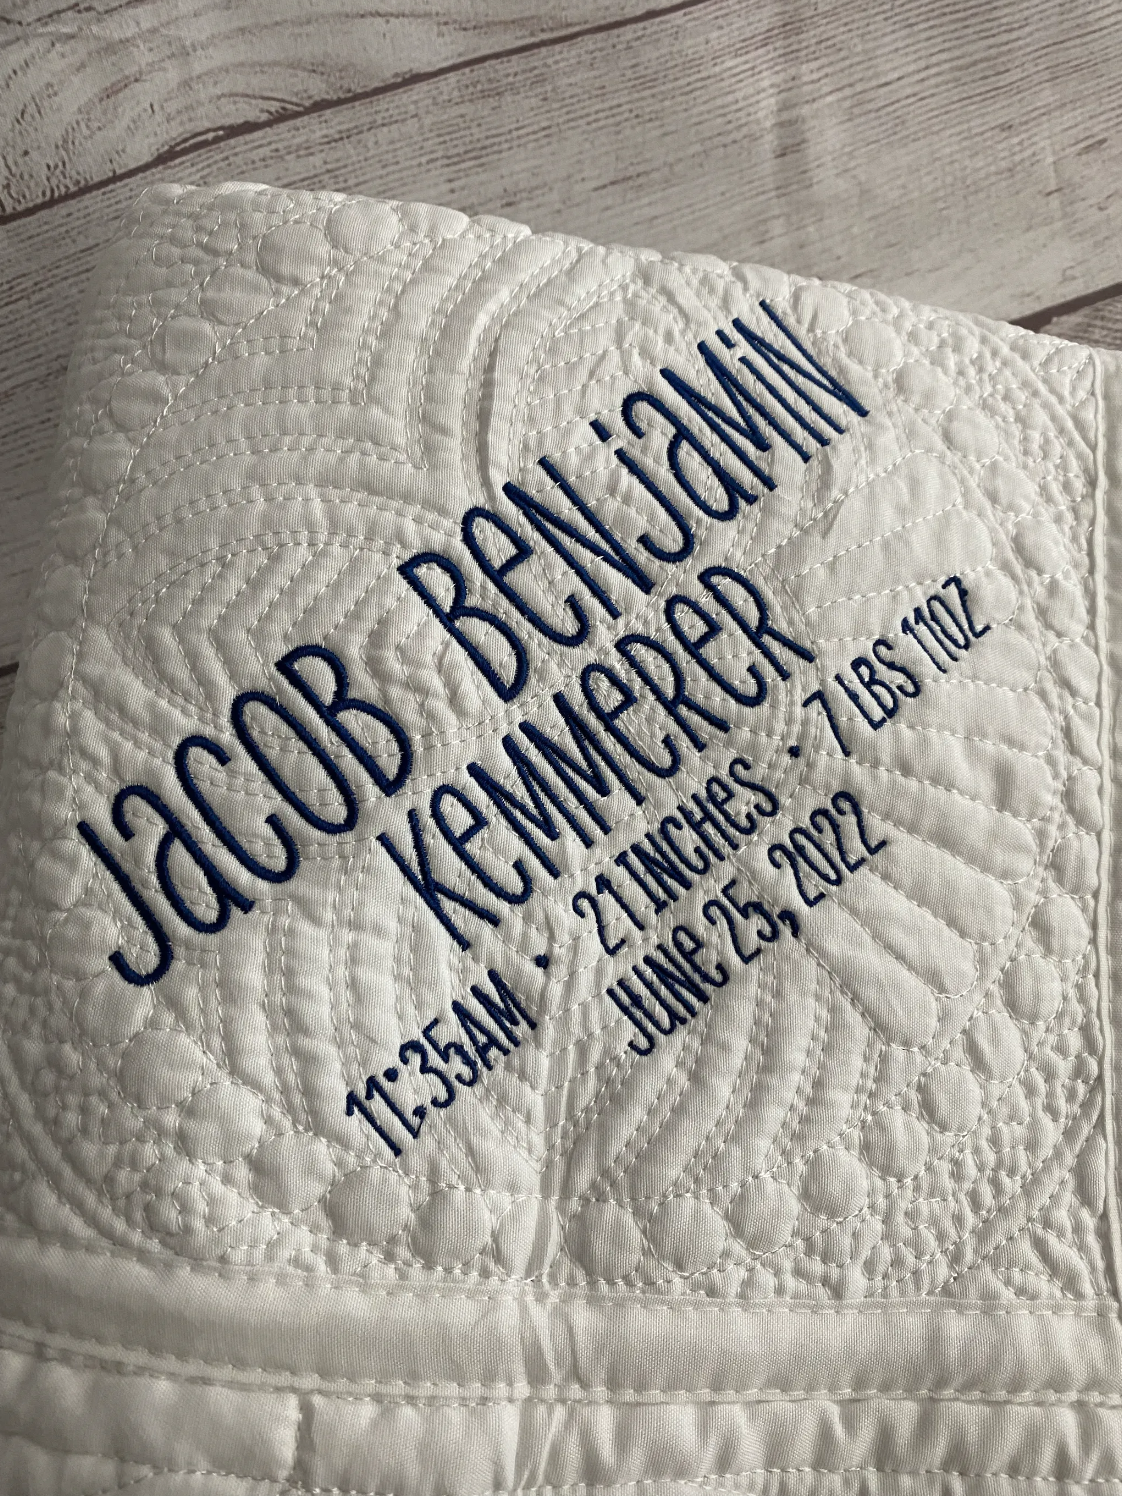 Personalized Heirloom baby quilt